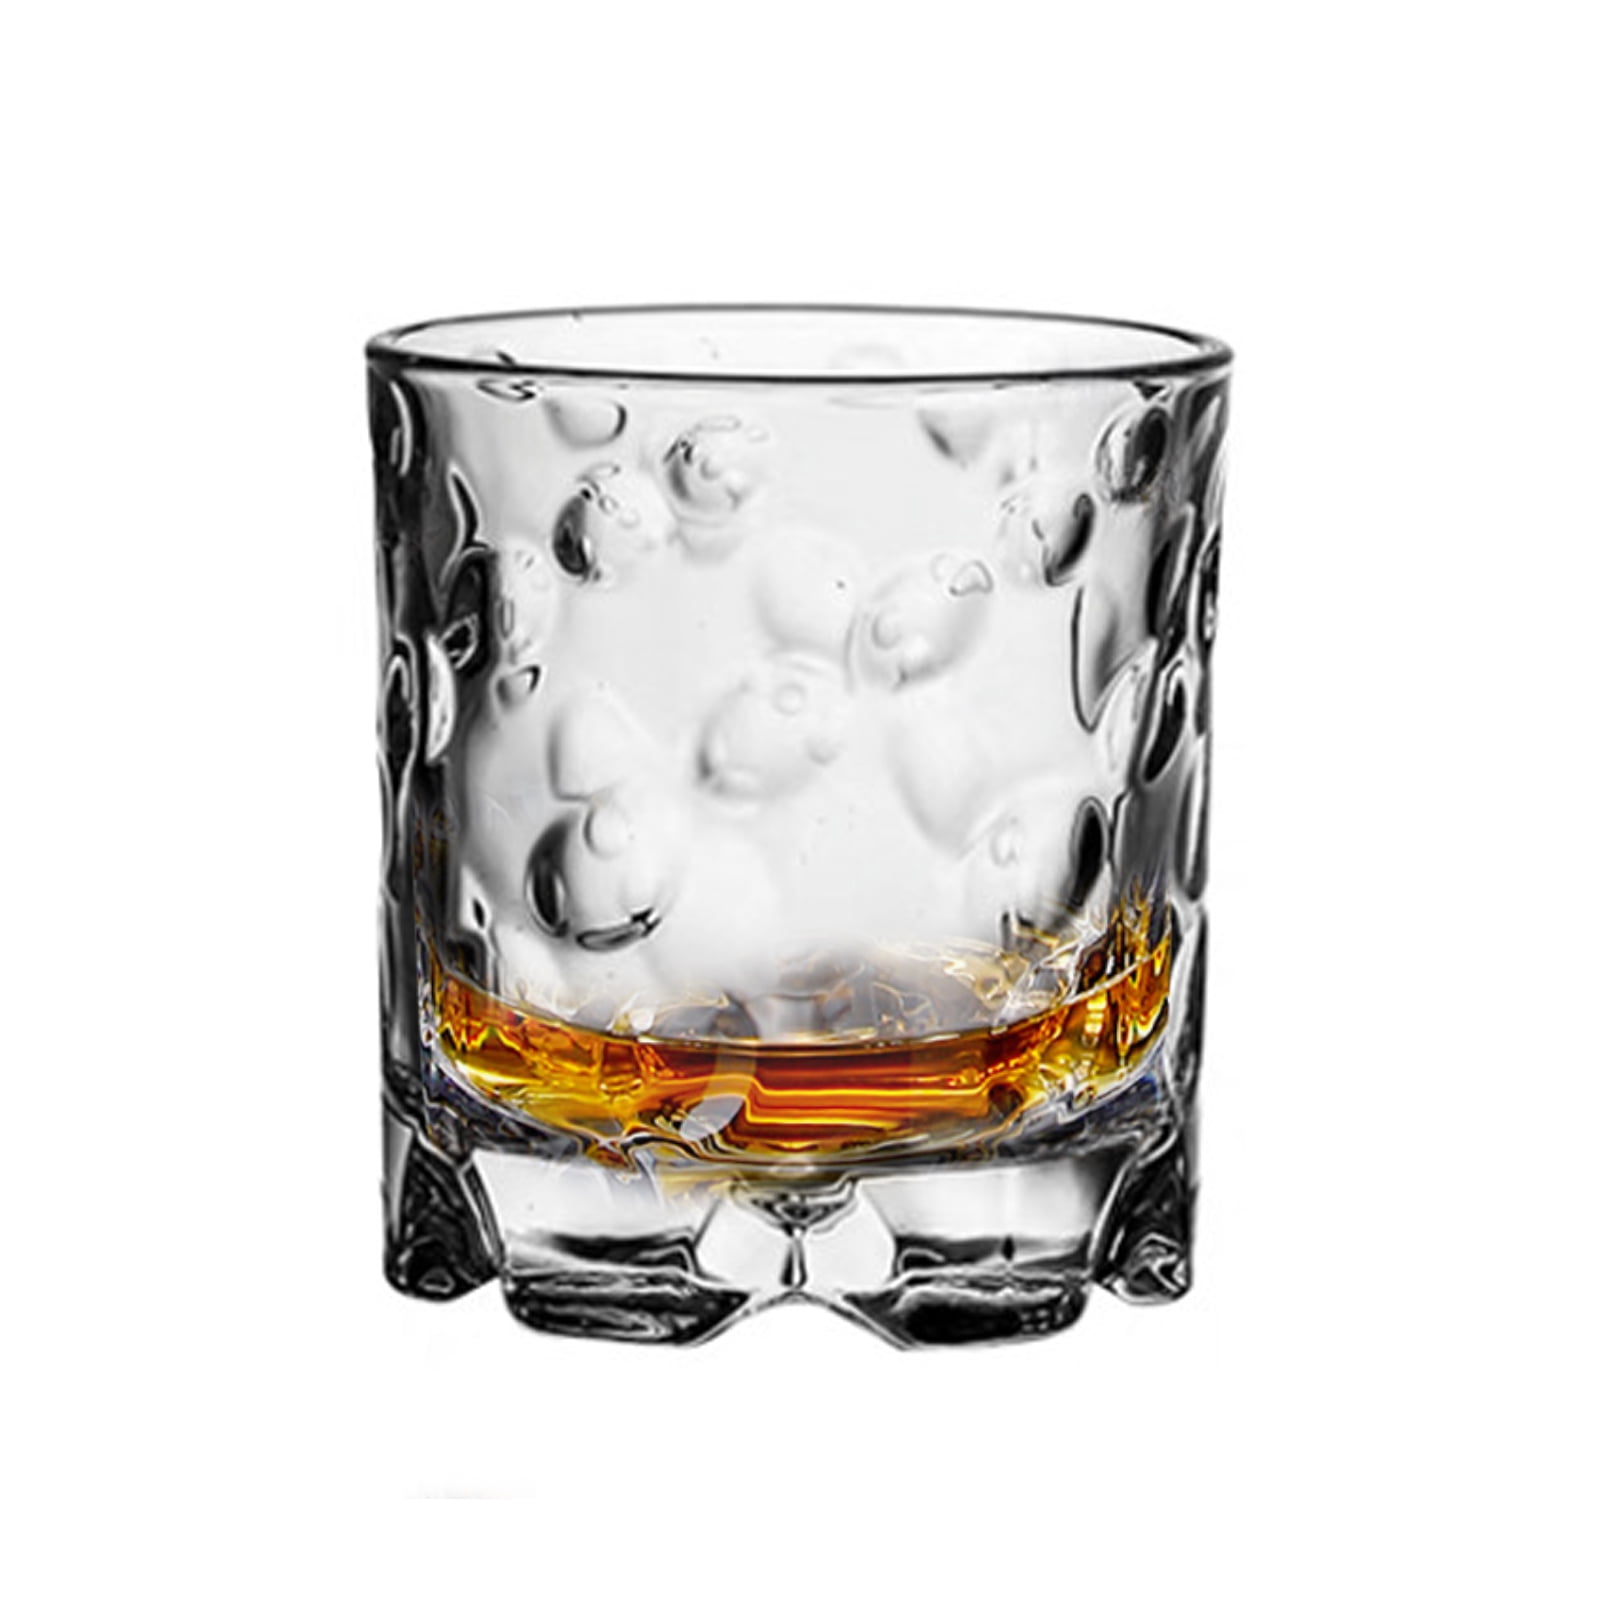 Glass set round whiskey glass (12 oz.)- Vintage crystal alcohol, whiskey,  tequila, Scotch, white wine, rum, man's gift, thick-weighted bottom  cocktail 350ml 